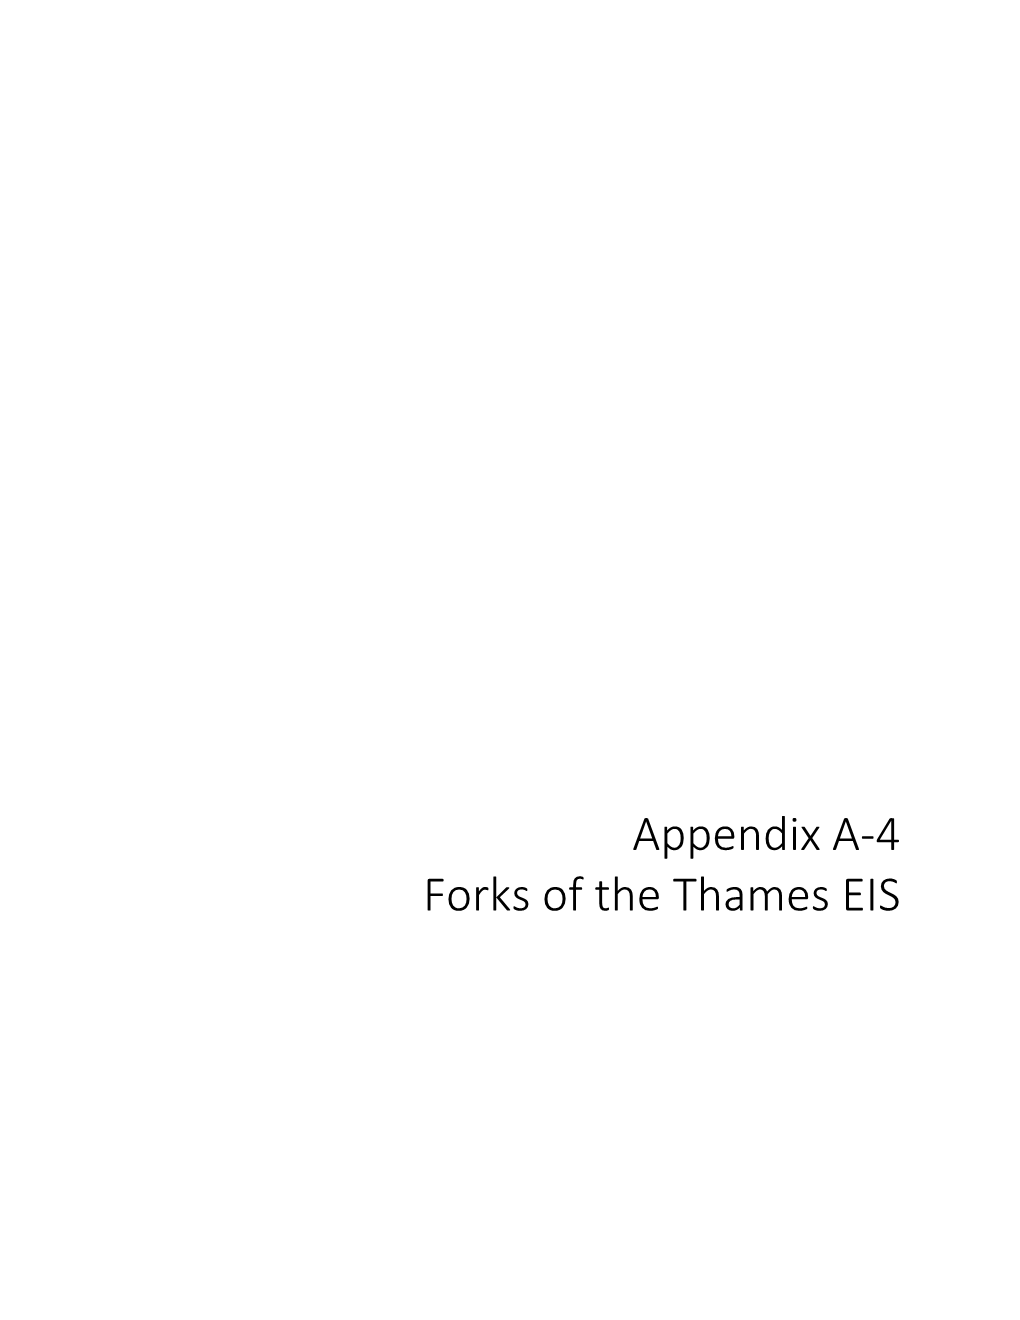 Appendix A-4 Forks of the Thames EIS DRAFT